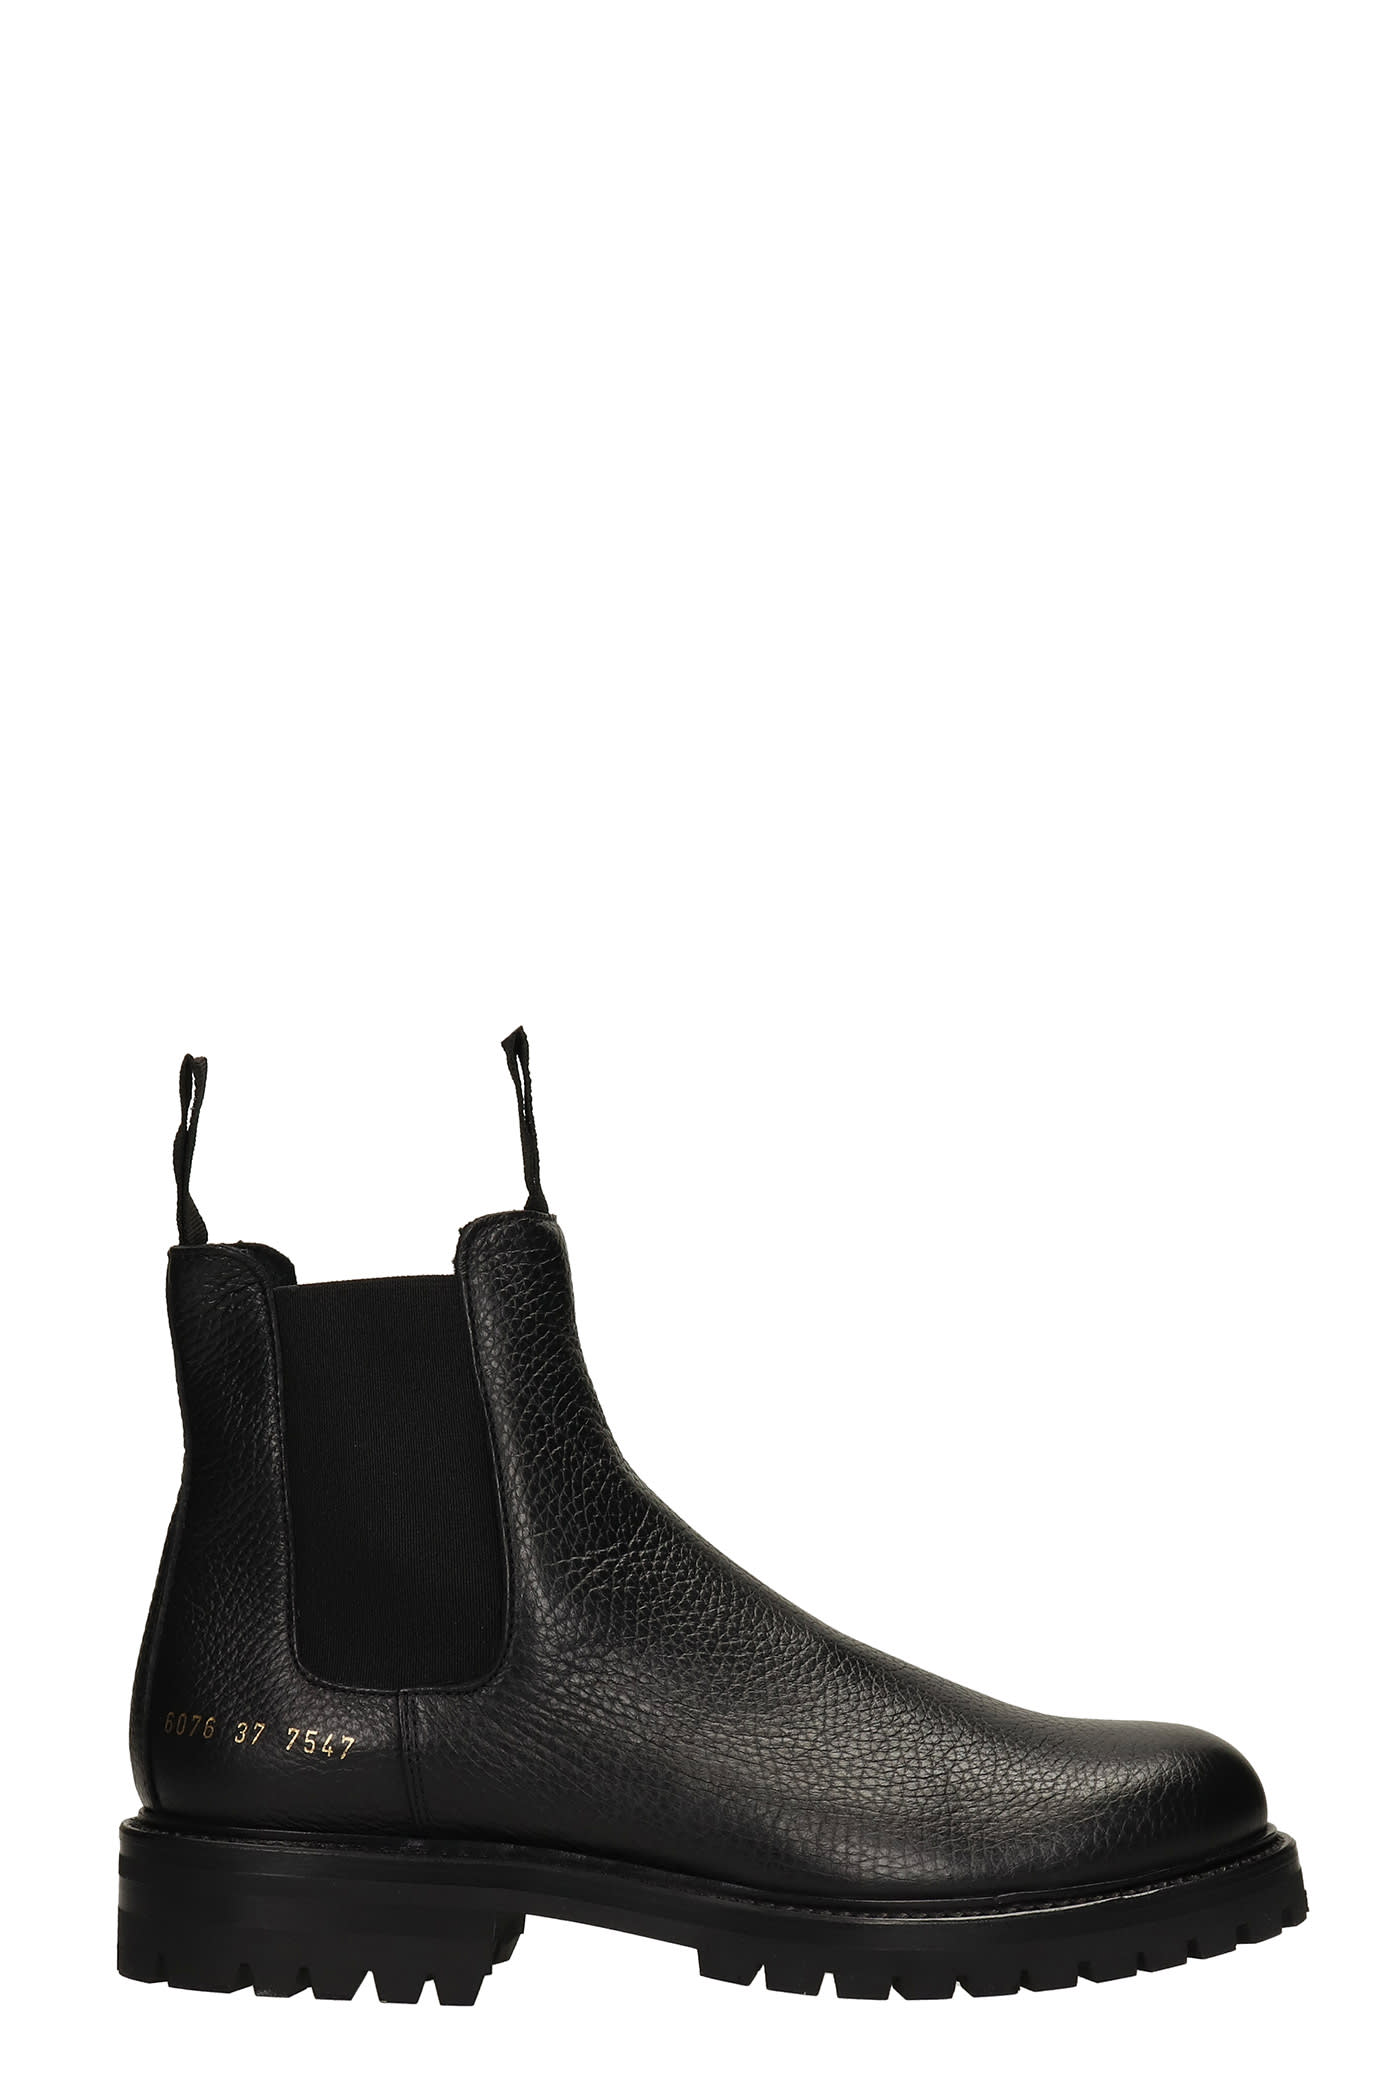 Common Projects Chelsea Combat Boots In Black Leather